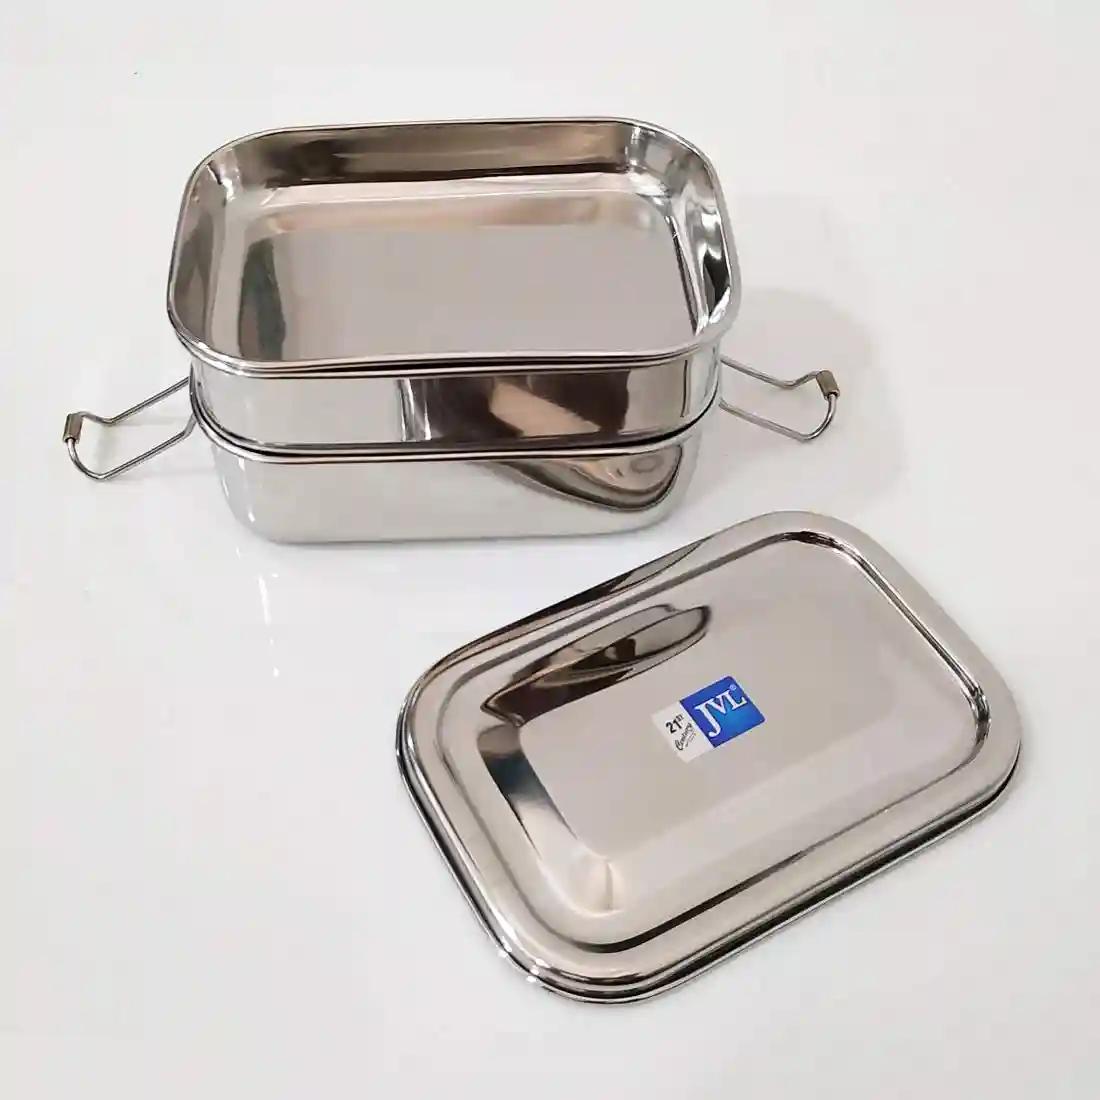 Jvl Stainless Steel Rectangular Shape Double Layer Lunch Box With Inner Plate & Small Triangle Shape Lunch Box With Mini Container Not Leak Proof - Pack Of 2